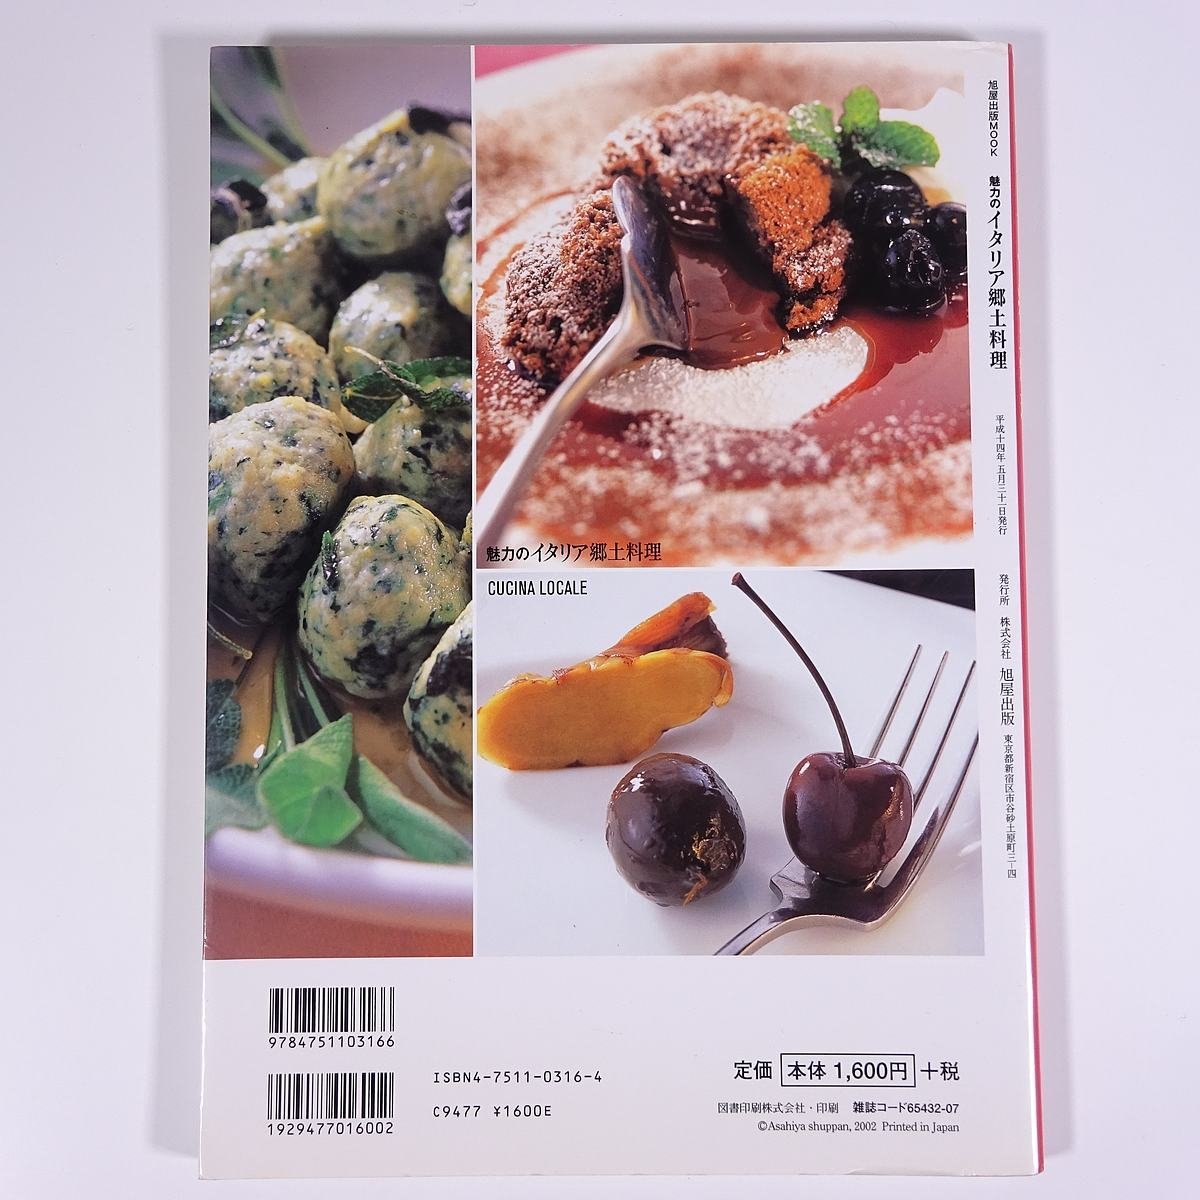  charm. Italy . earth cooking now .. asahi shop publish 2002 large book@ cooking .. recipe Italian food 